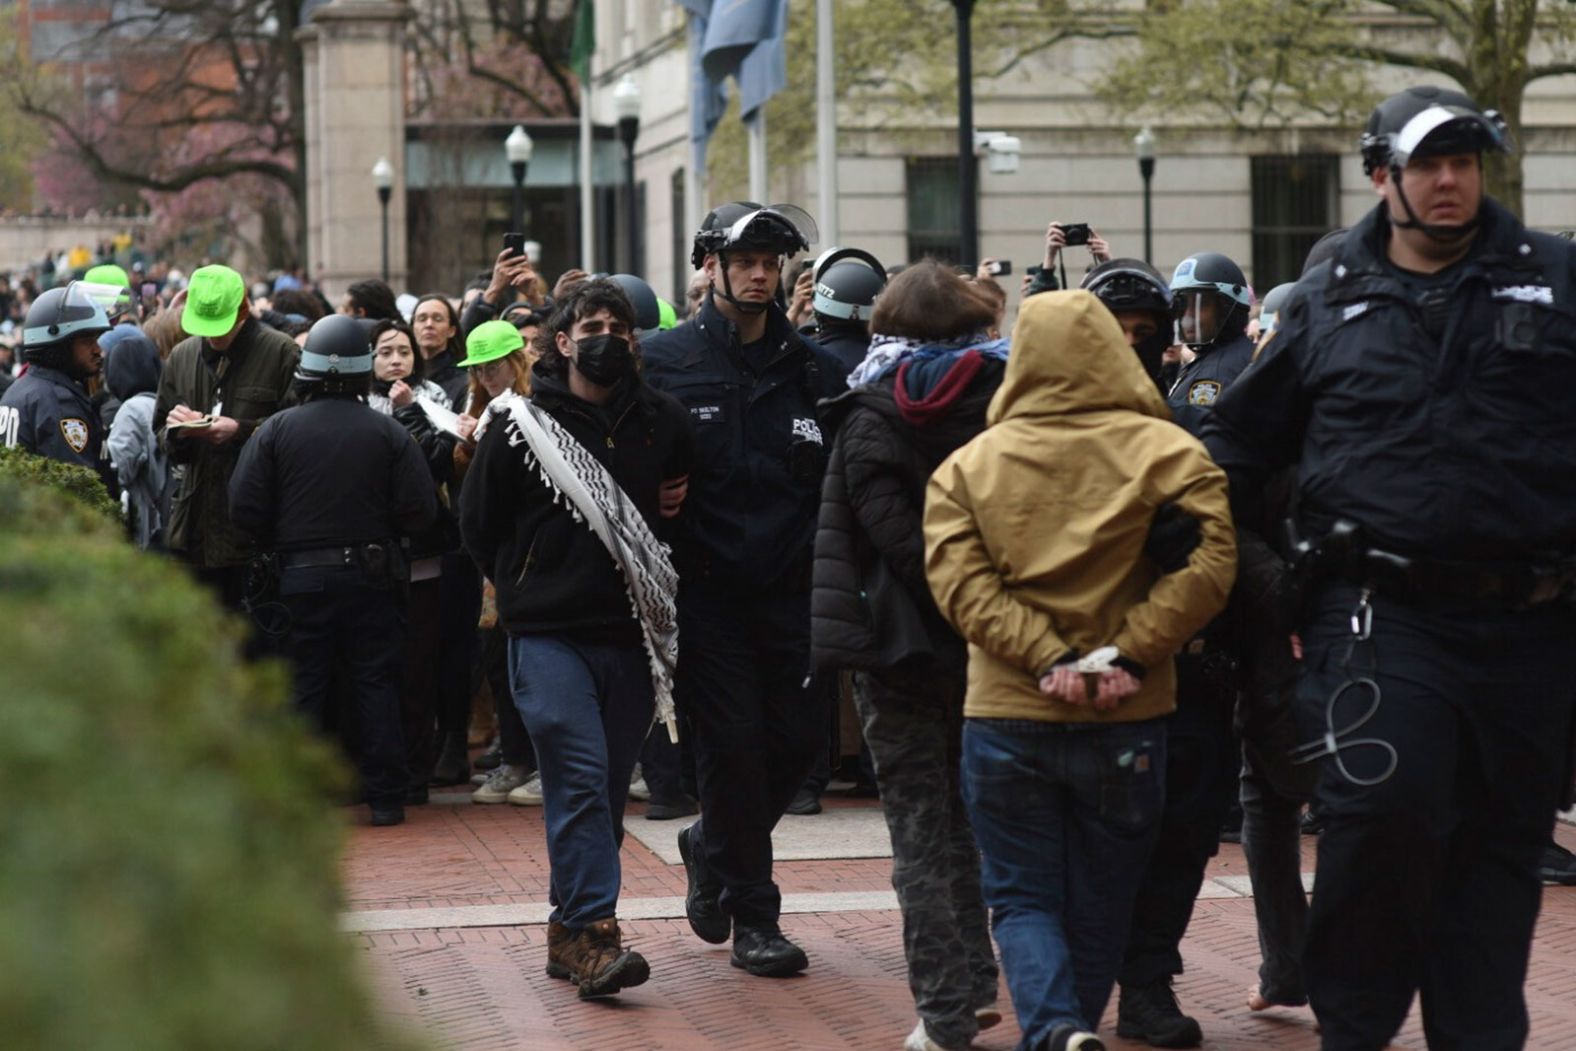 Police officers arrest pro-Palestinian demonstrators who had set up an encampment at Columbia University in New York on Thursday, April 18. <a href="index.php?page=&url=https%3A%2F%2Fwww.cnn.com%2F2024%2F04%2F18%2Fus%2Fnypd-disperses-pro-palestinian-protest-columbia-university%2Findex.html" target="_blank">More than 100 people were arrested</a> on suspicion of criminal trespass, according to a law enforcement official, as police dispersed the protest, which began a day earlier as the university's president <a href="index.php?page=&url=https%3A%2F%2Fwww.cnn.com%2Fbusiness%2Flive-news%2Fcolumbia-antisemitism-house-testimony%2Findex.html" target="_blank">testified before a House committee</a> about the school's response to antisemitism.